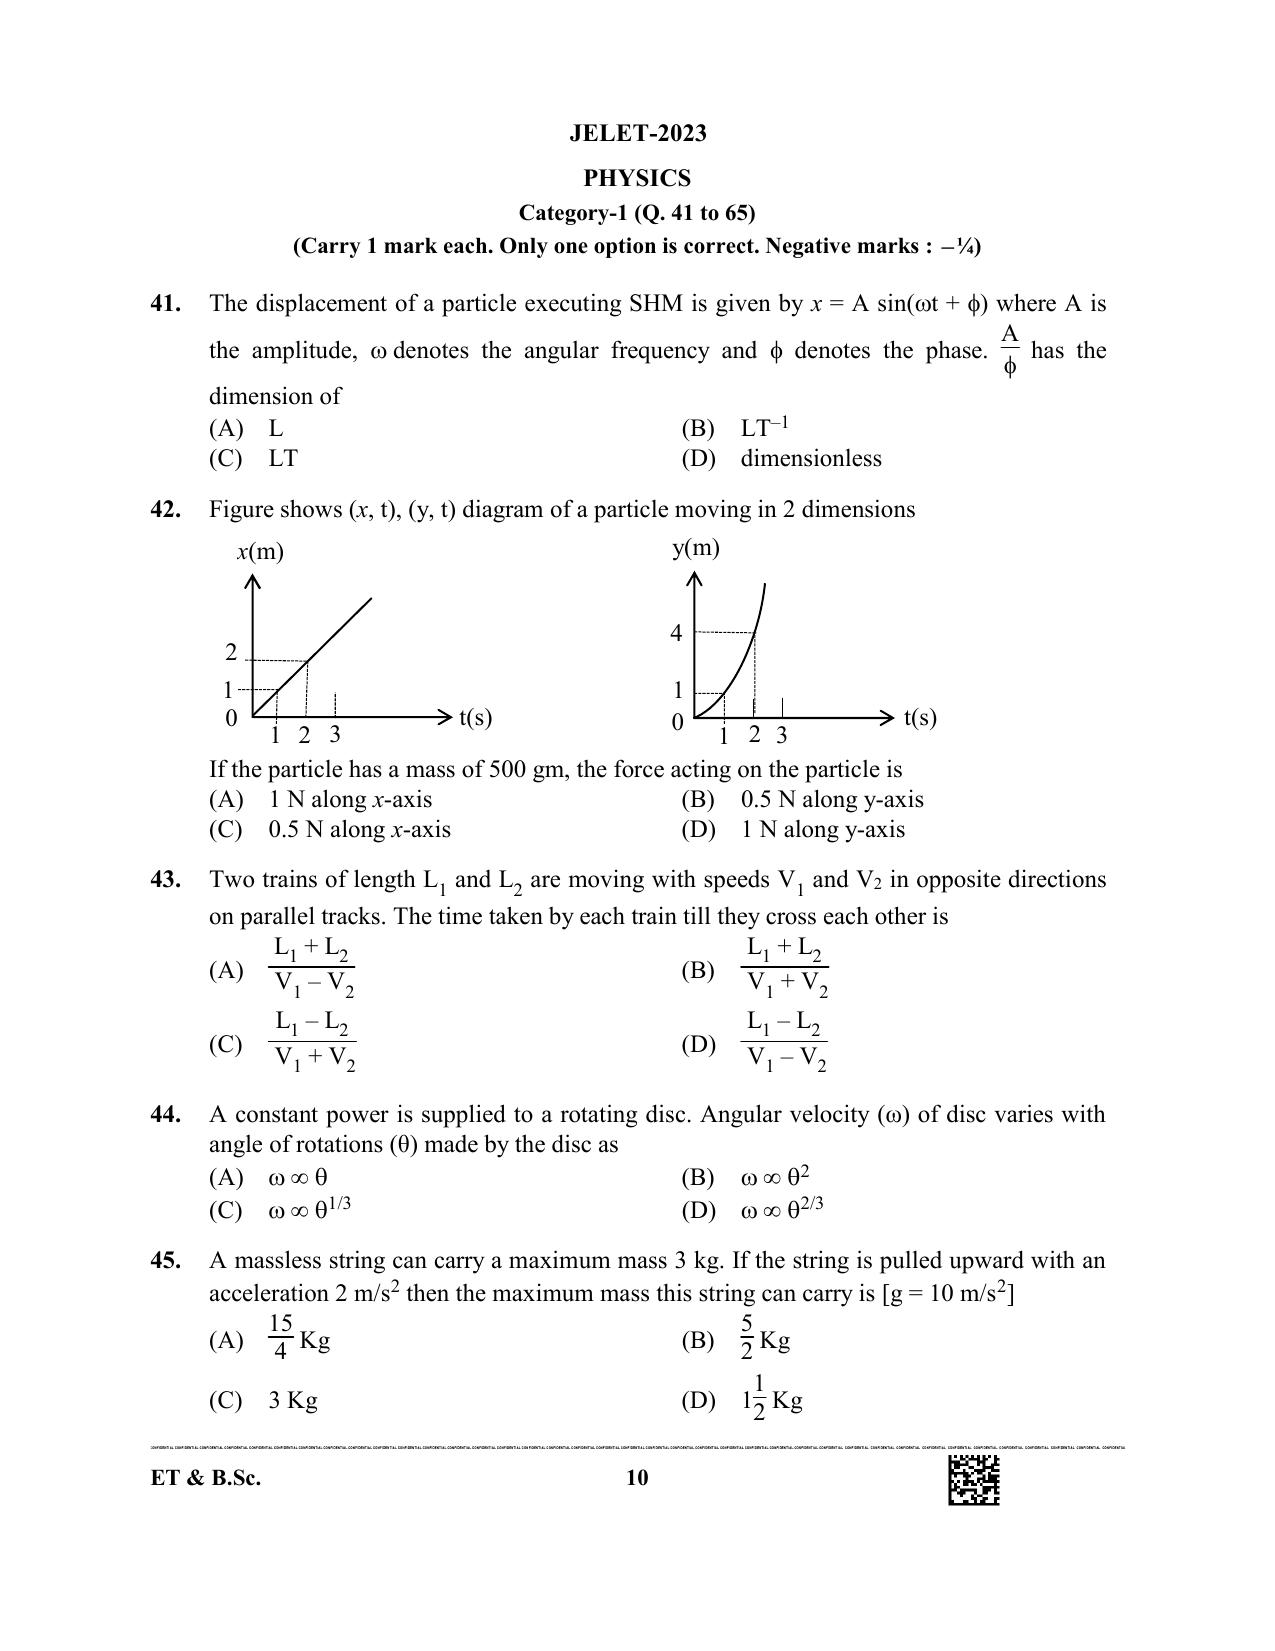 WBJEE JELET 2023 Paper I (ET & BSC) Question Papers - Page 10